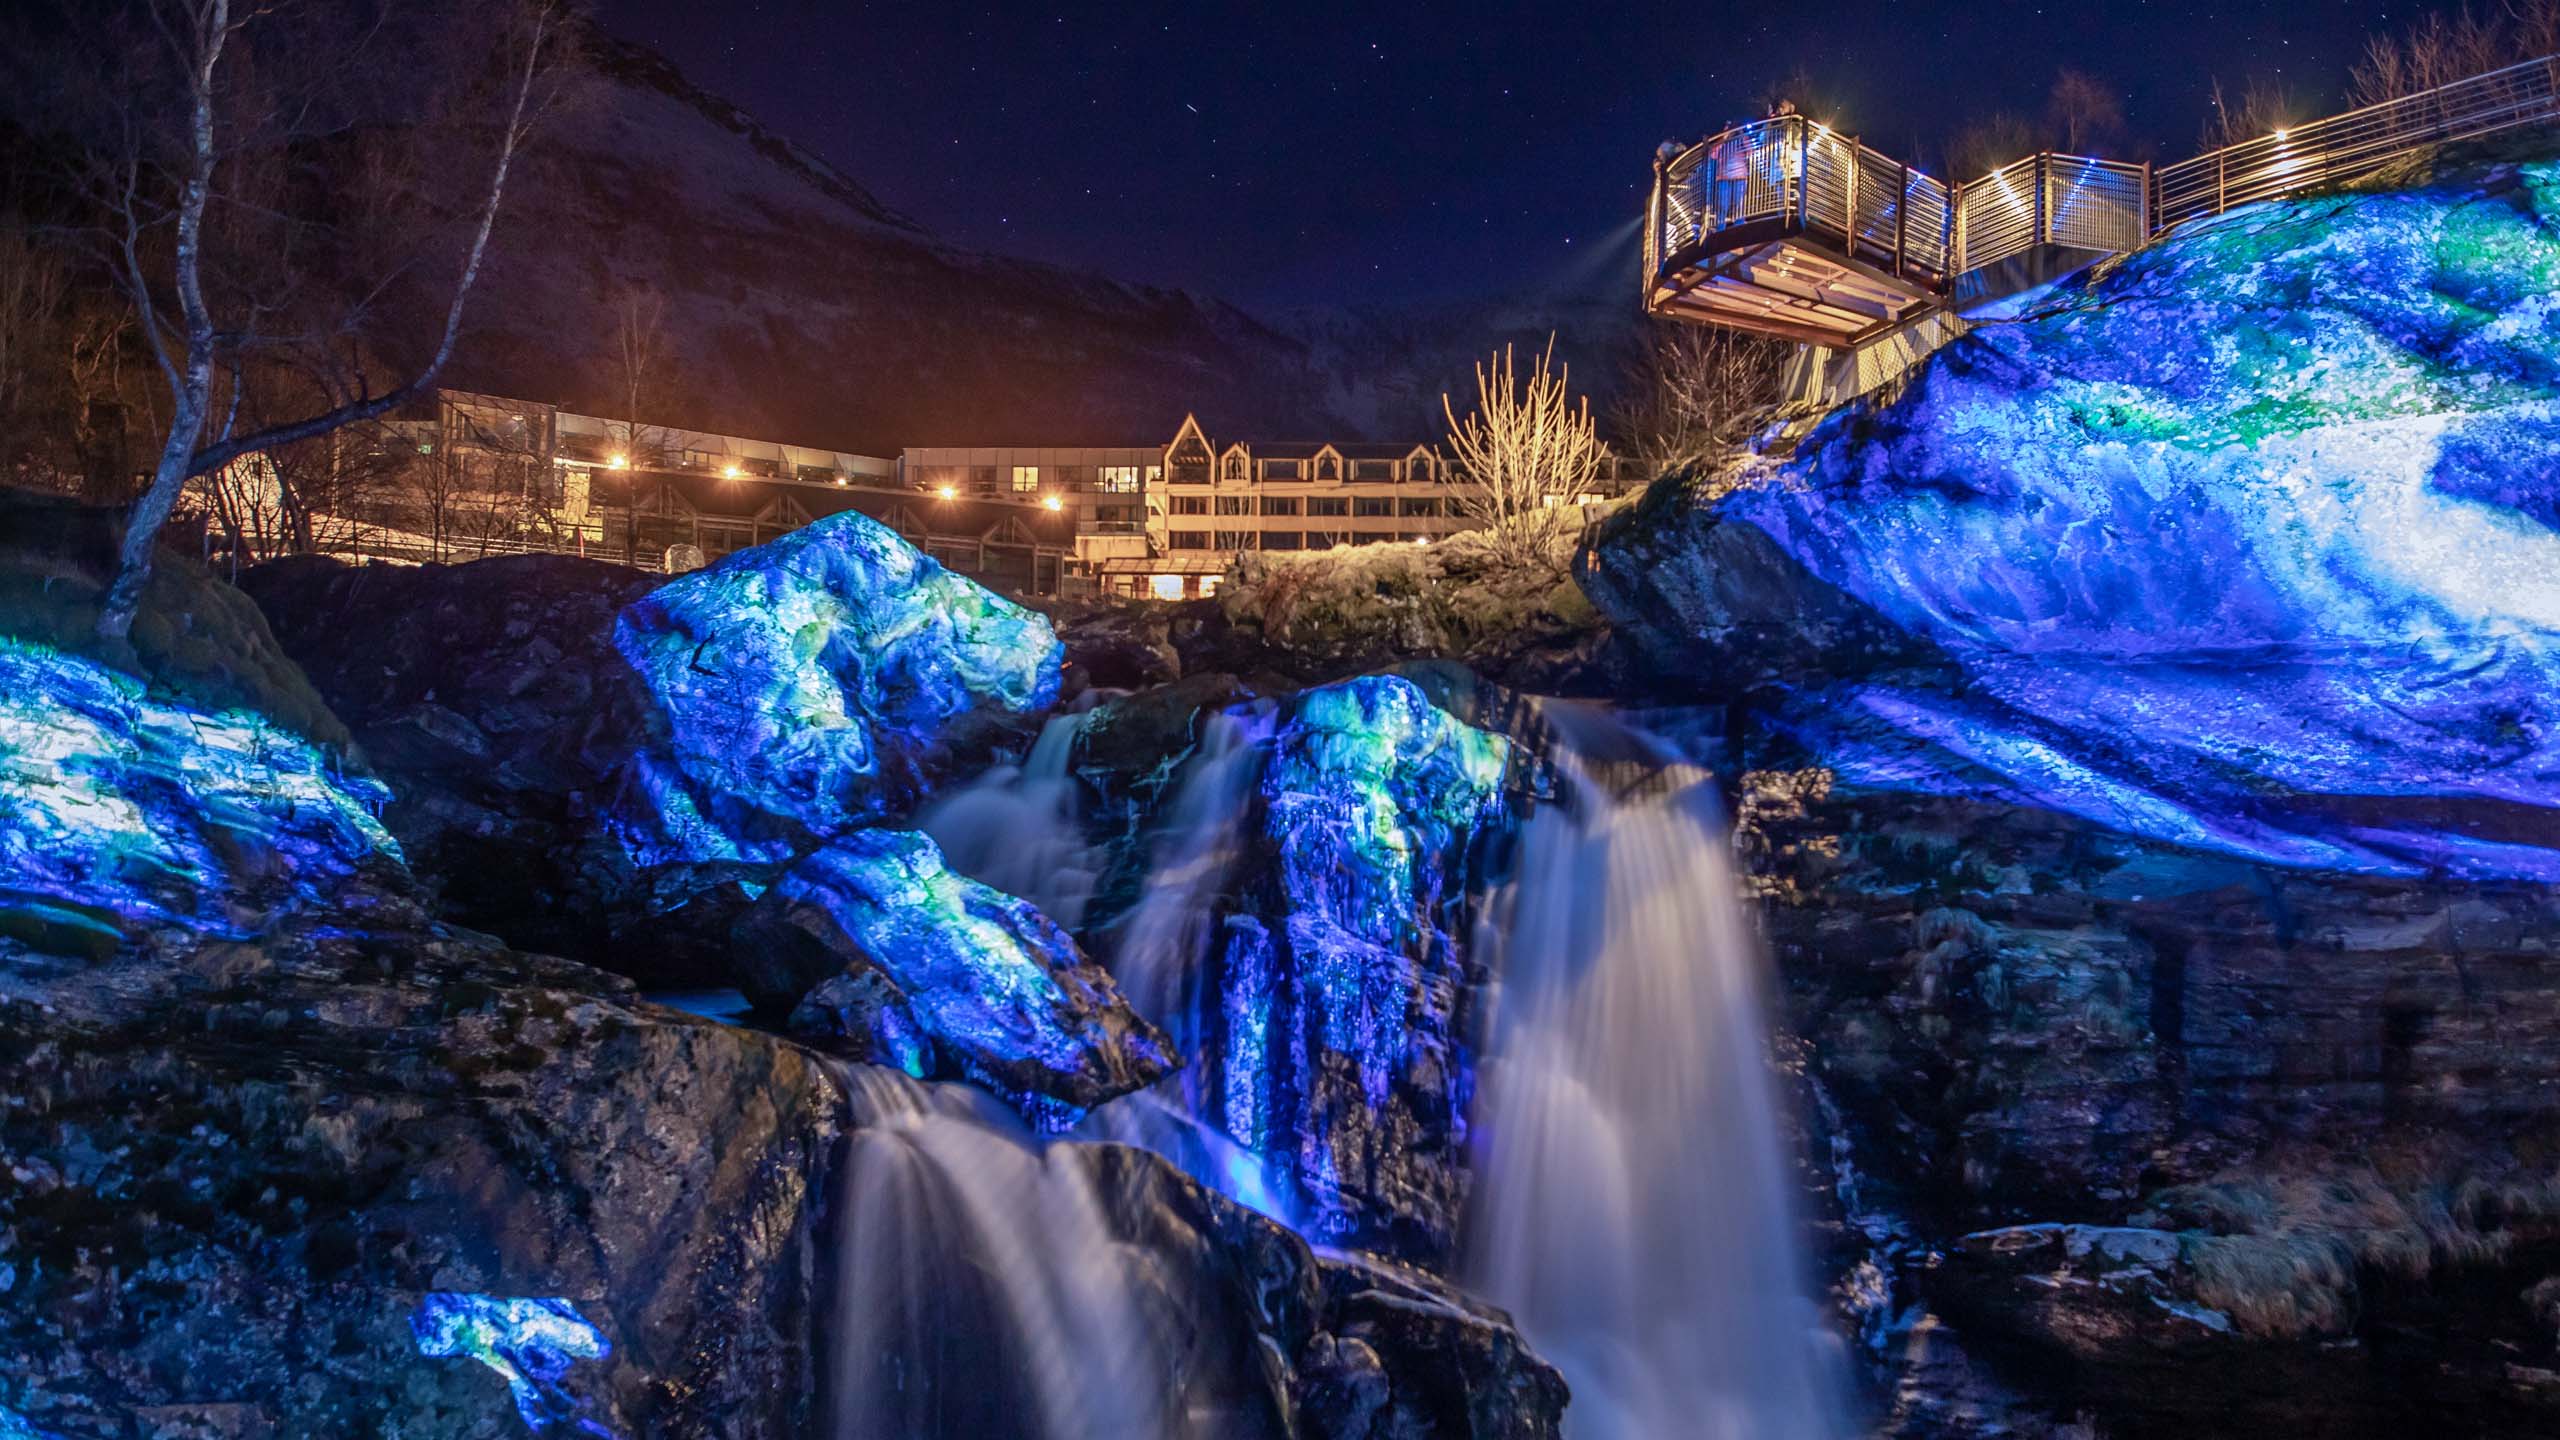 Video-mapping in nature on rocks and waterfall with beautiful blue color visuals